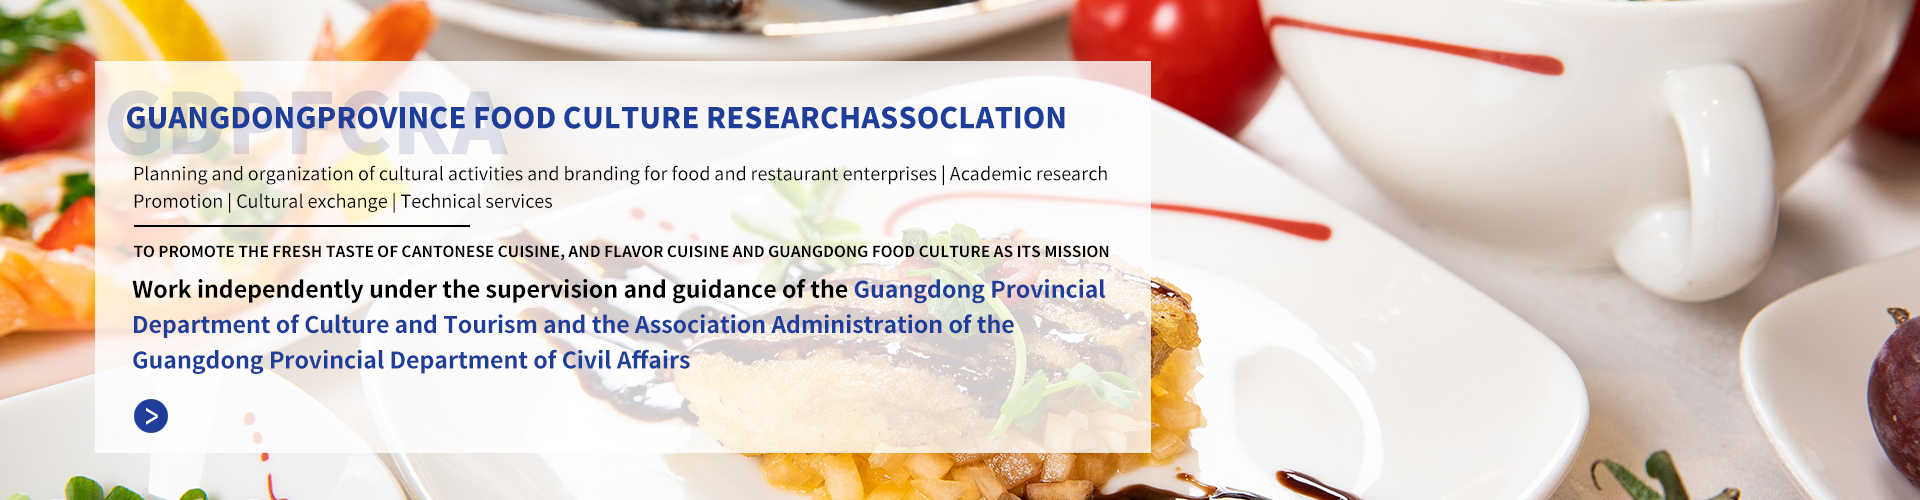 GuangDong Province Food Culture Research Assoclation